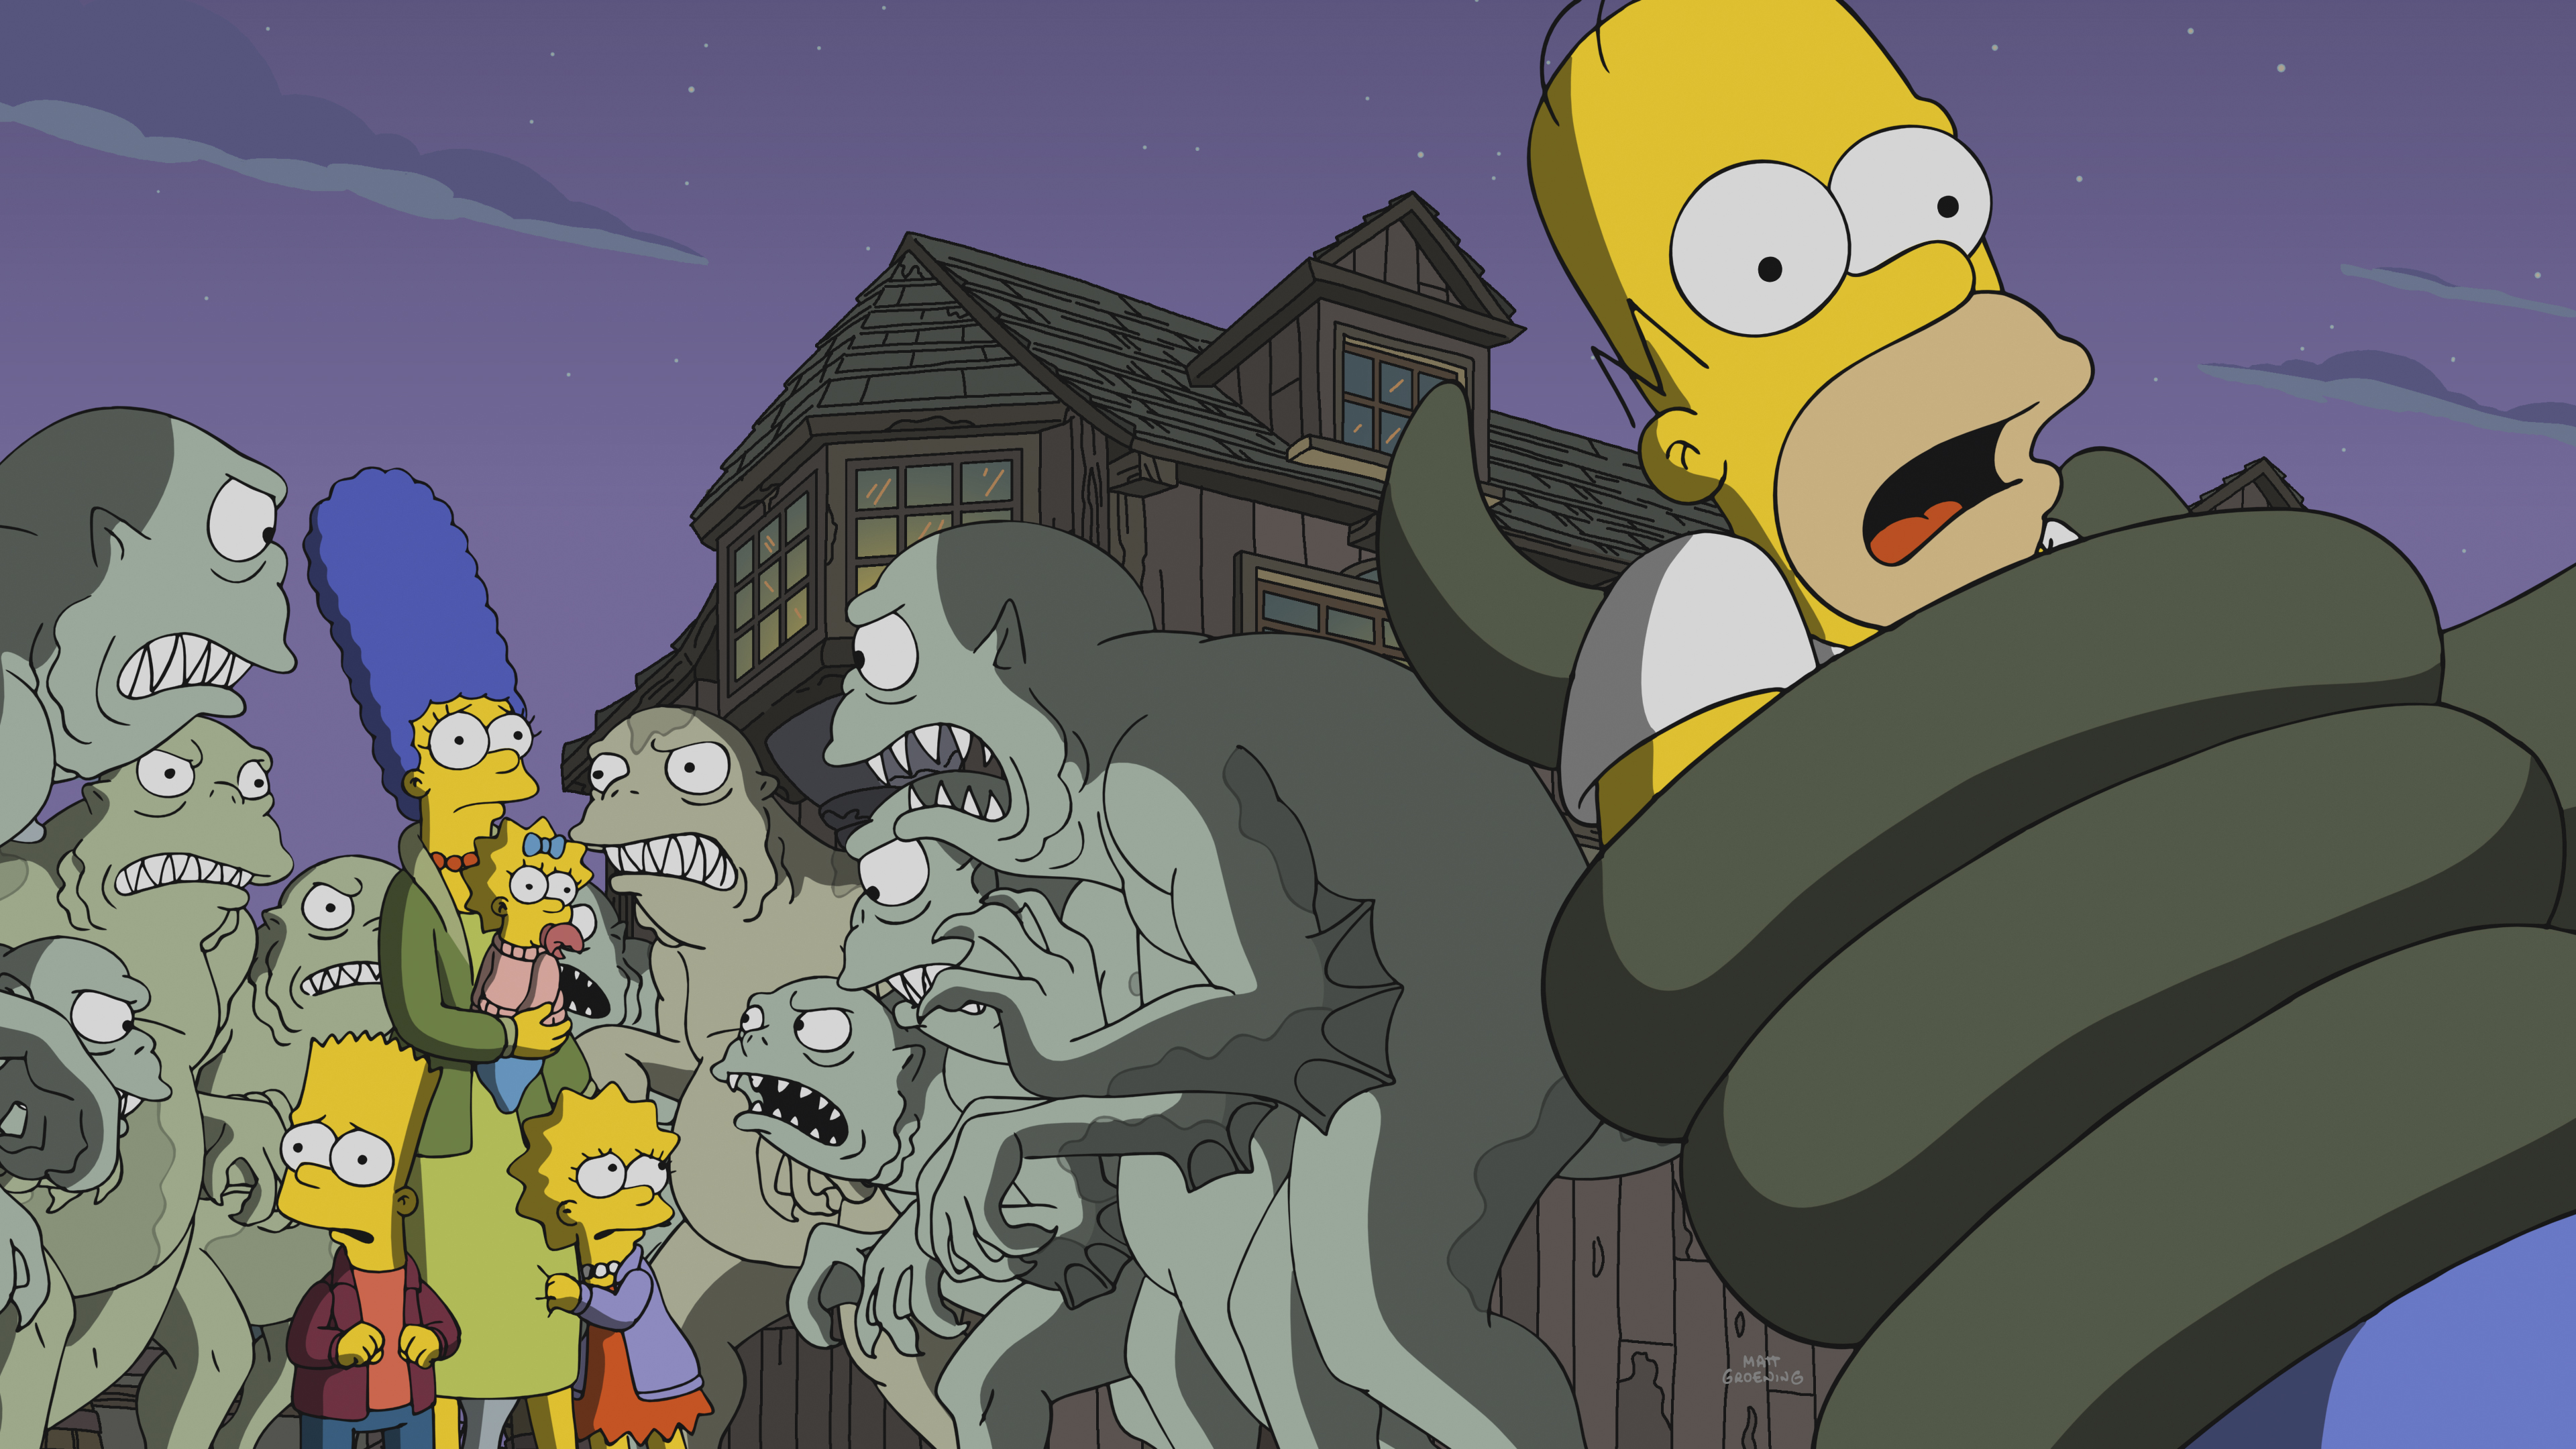 Simpsons treehouse of horrors torrent my rainy days 2009 dvdrip torrent